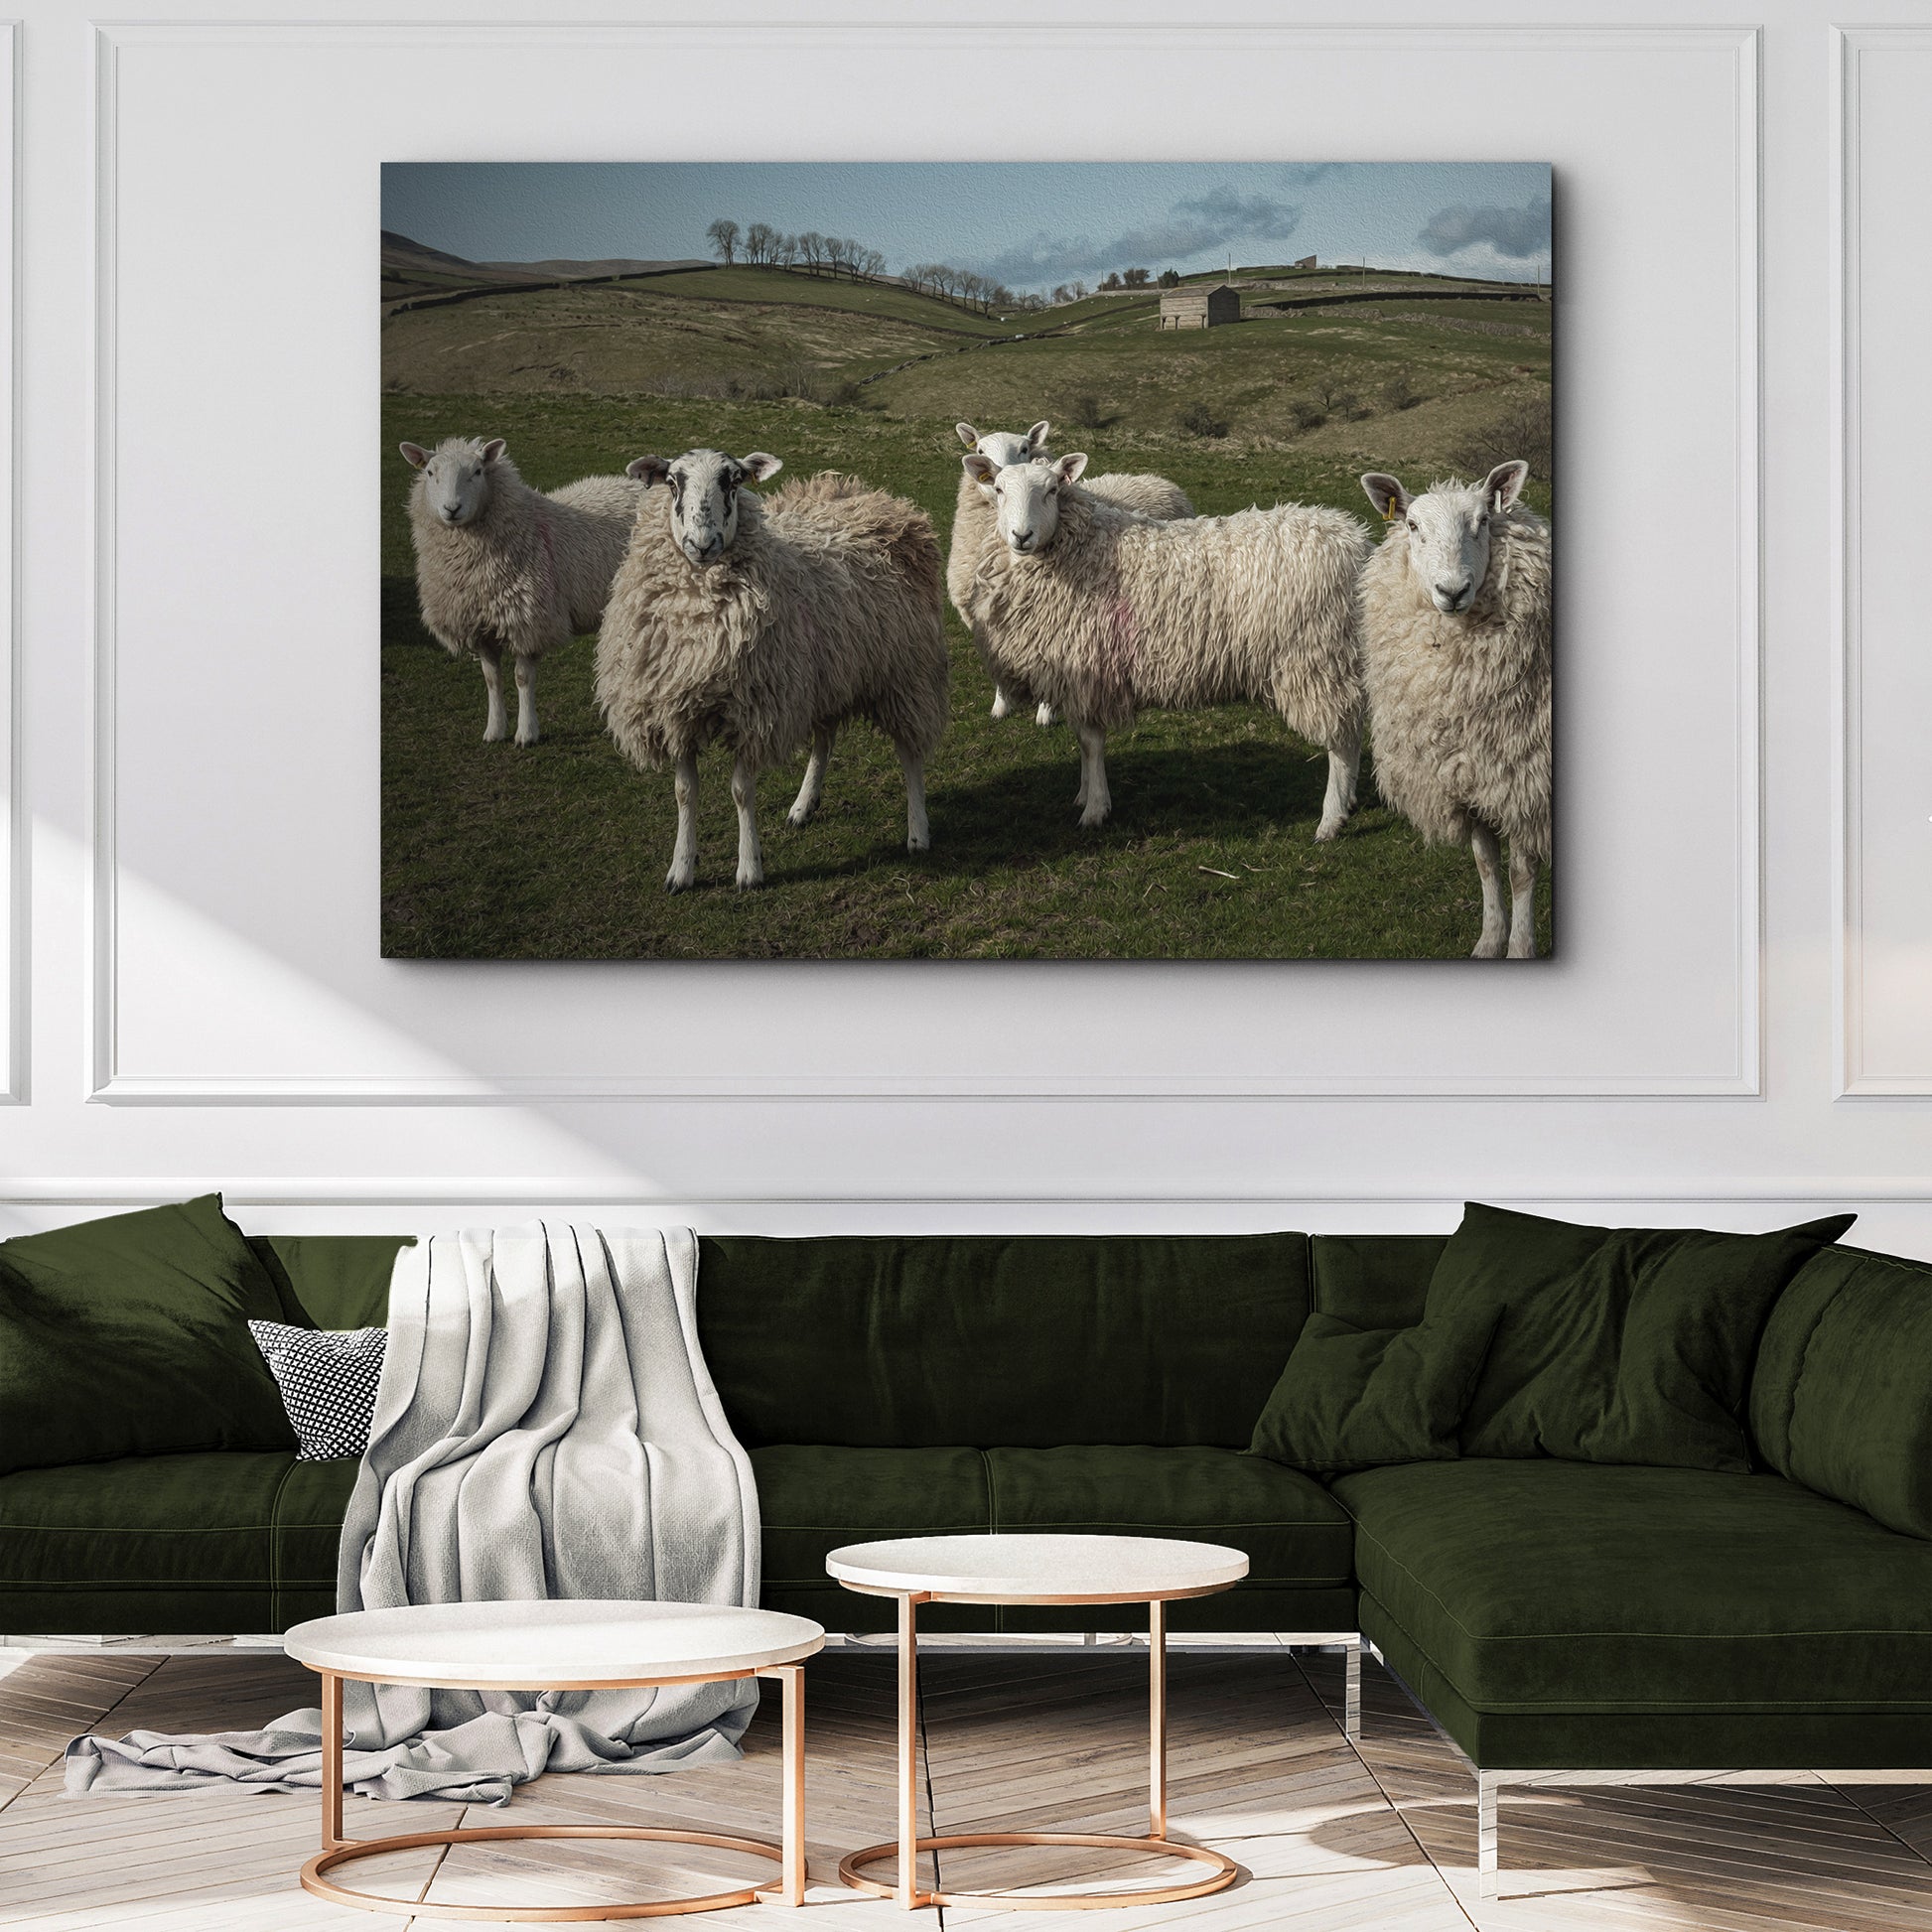 Flock Of Sheep Canvas Wall Art Style 2 - Image by Tailored Canvases